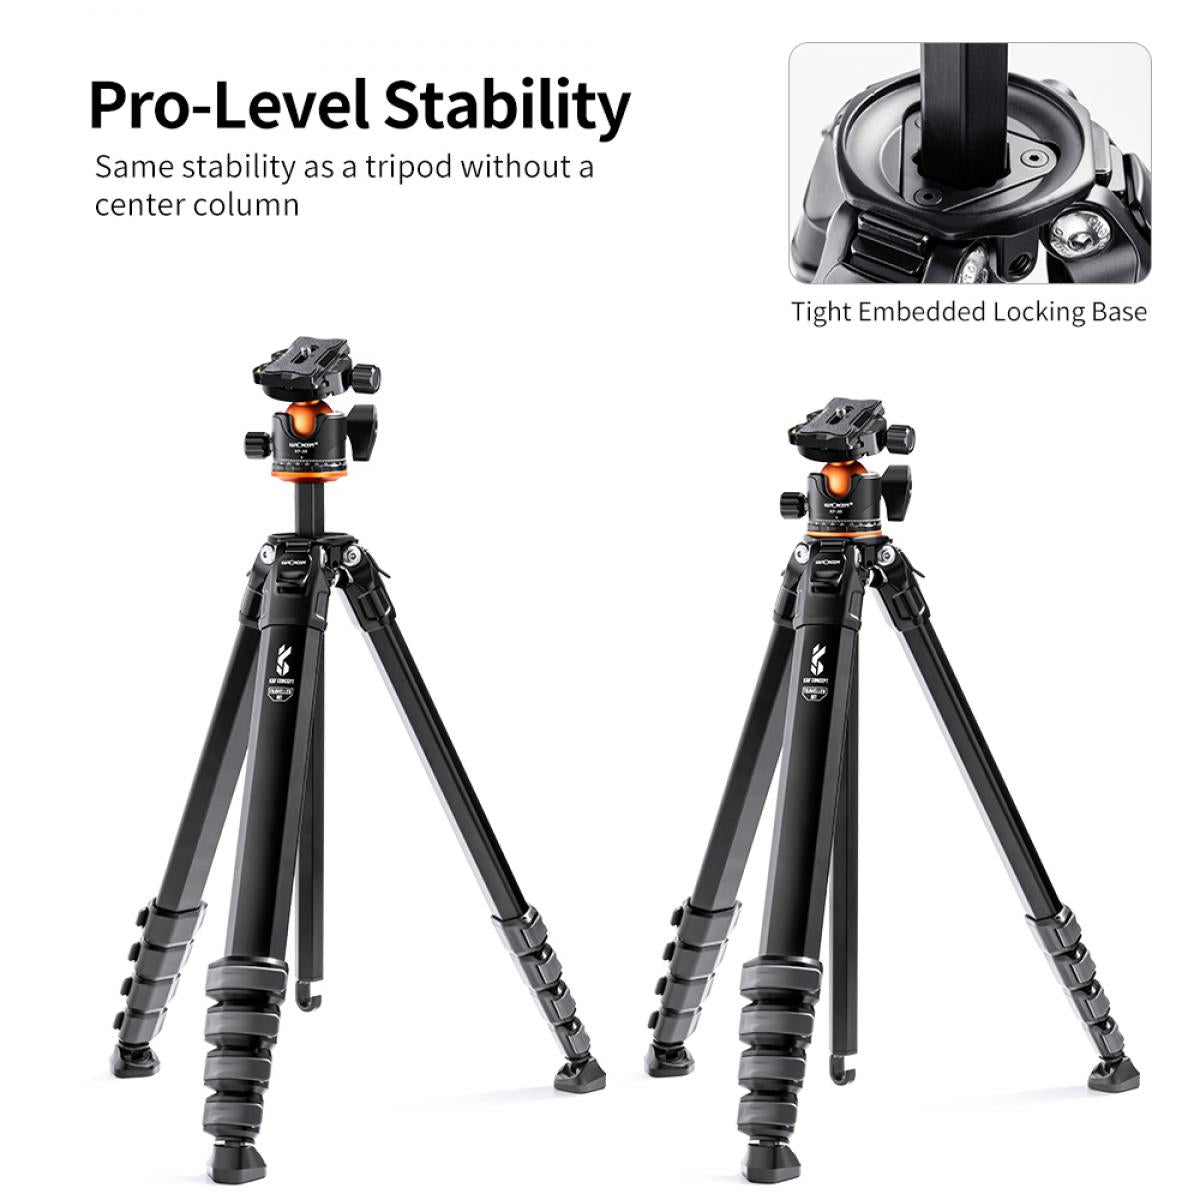 K&F Concept Mutate Series Lightweight Compact Travel Camera Tripod Aluminum Alloy with Ball Head, 1.77m Max Height, 15kg Load Capacity